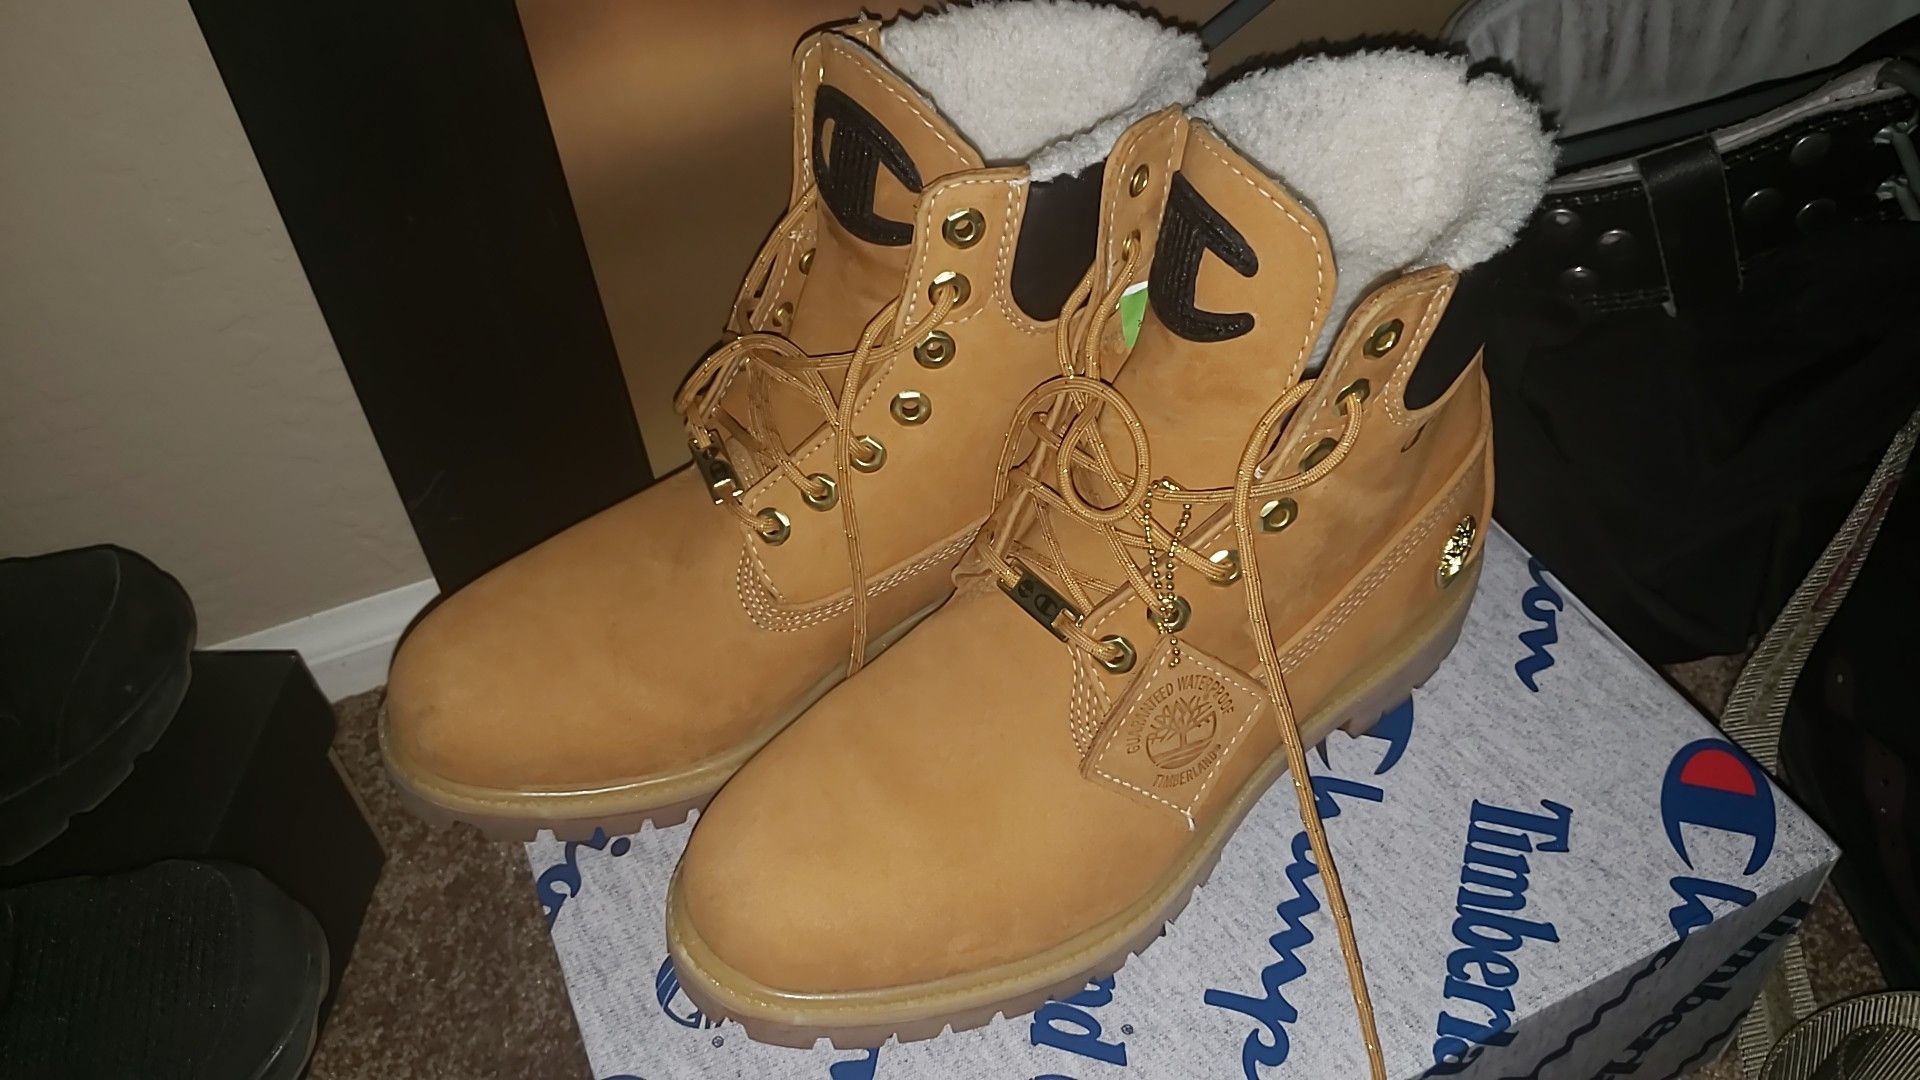 Champion timberlands for sale. size 10 $150 obo bought it for $250 with receipt and extra laces. My loss your gain